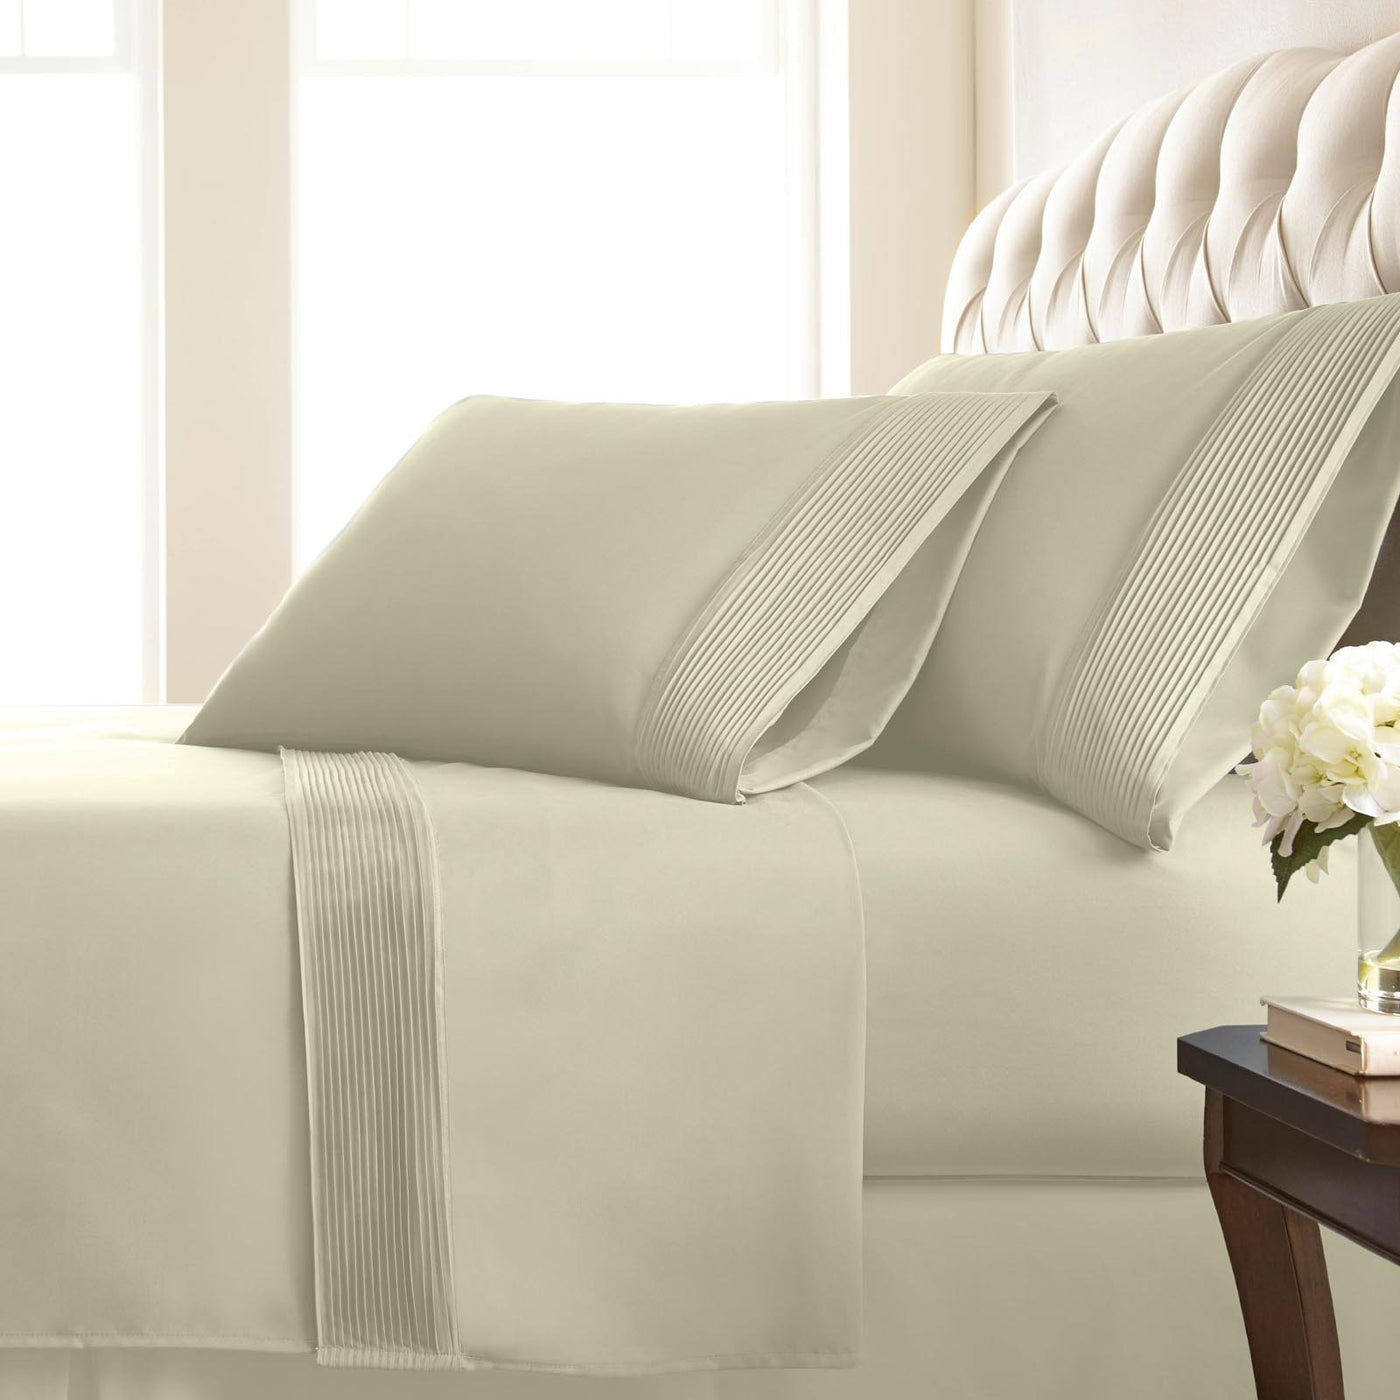 110 GSM Pleated Sheet Set in off white